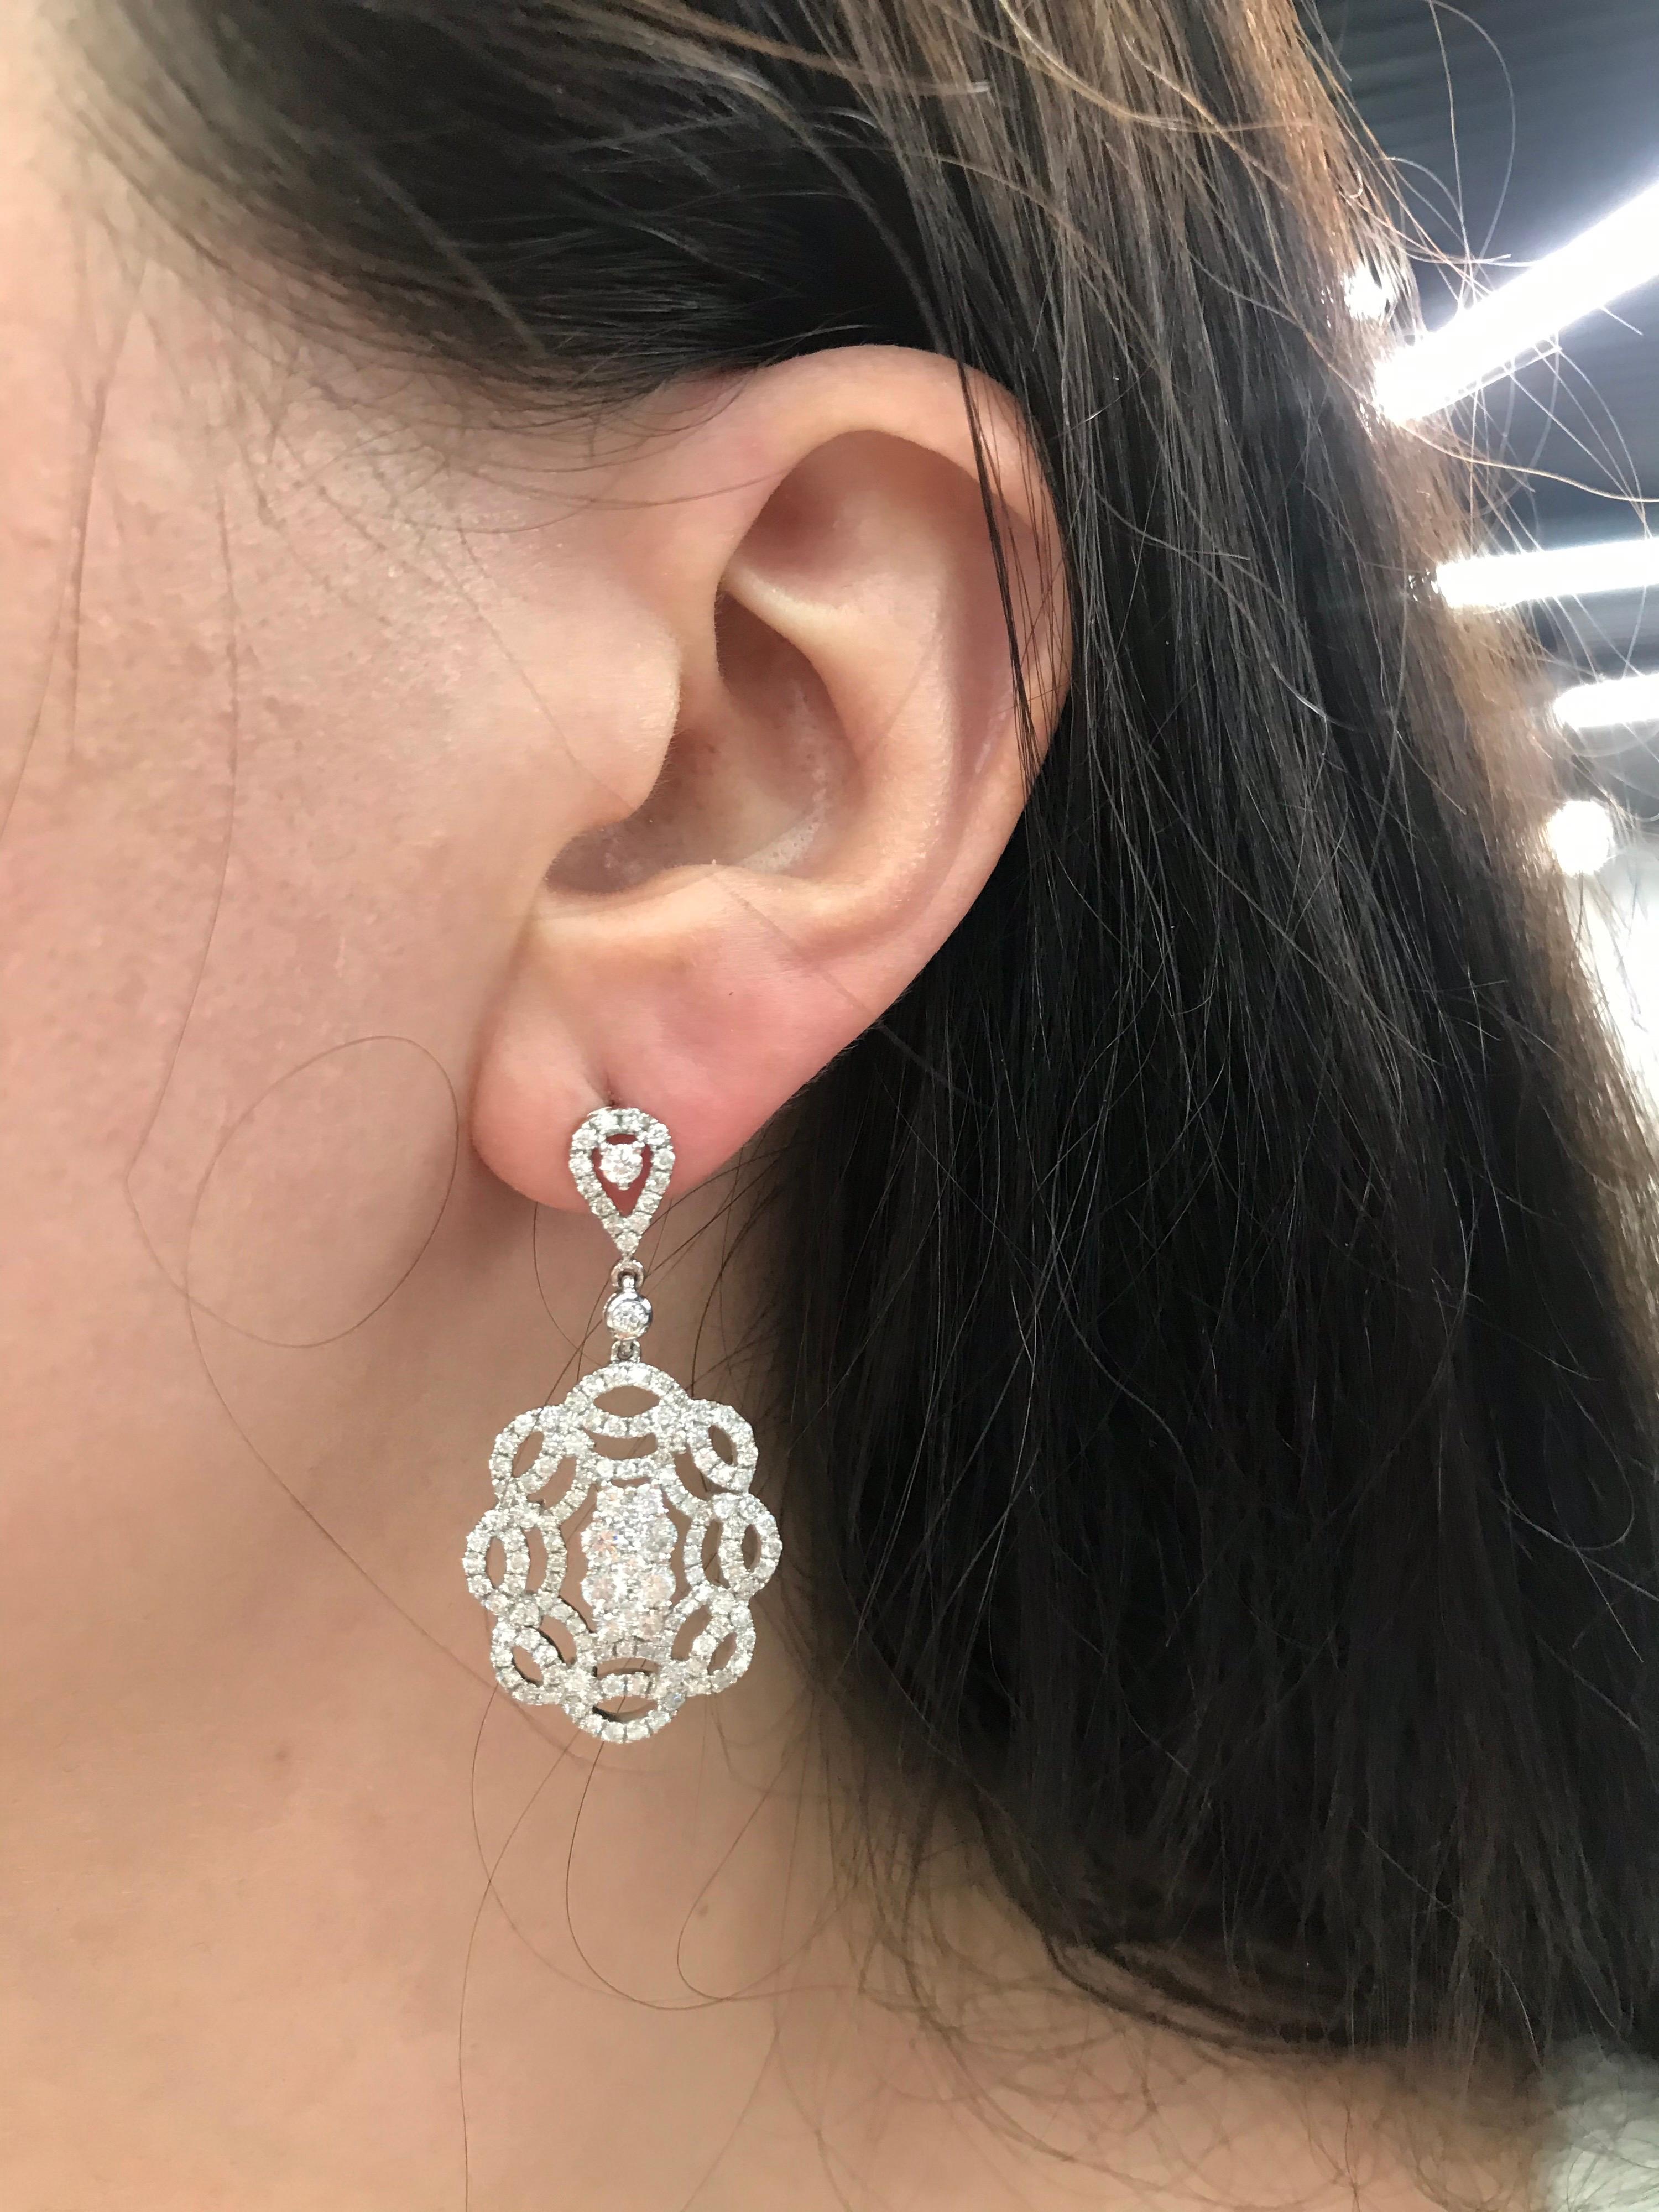 14K White gold drop swirl earring featuring numerous round brilliant diamonds weighing approximately 2 carats. 
Color H
Clarity SI2